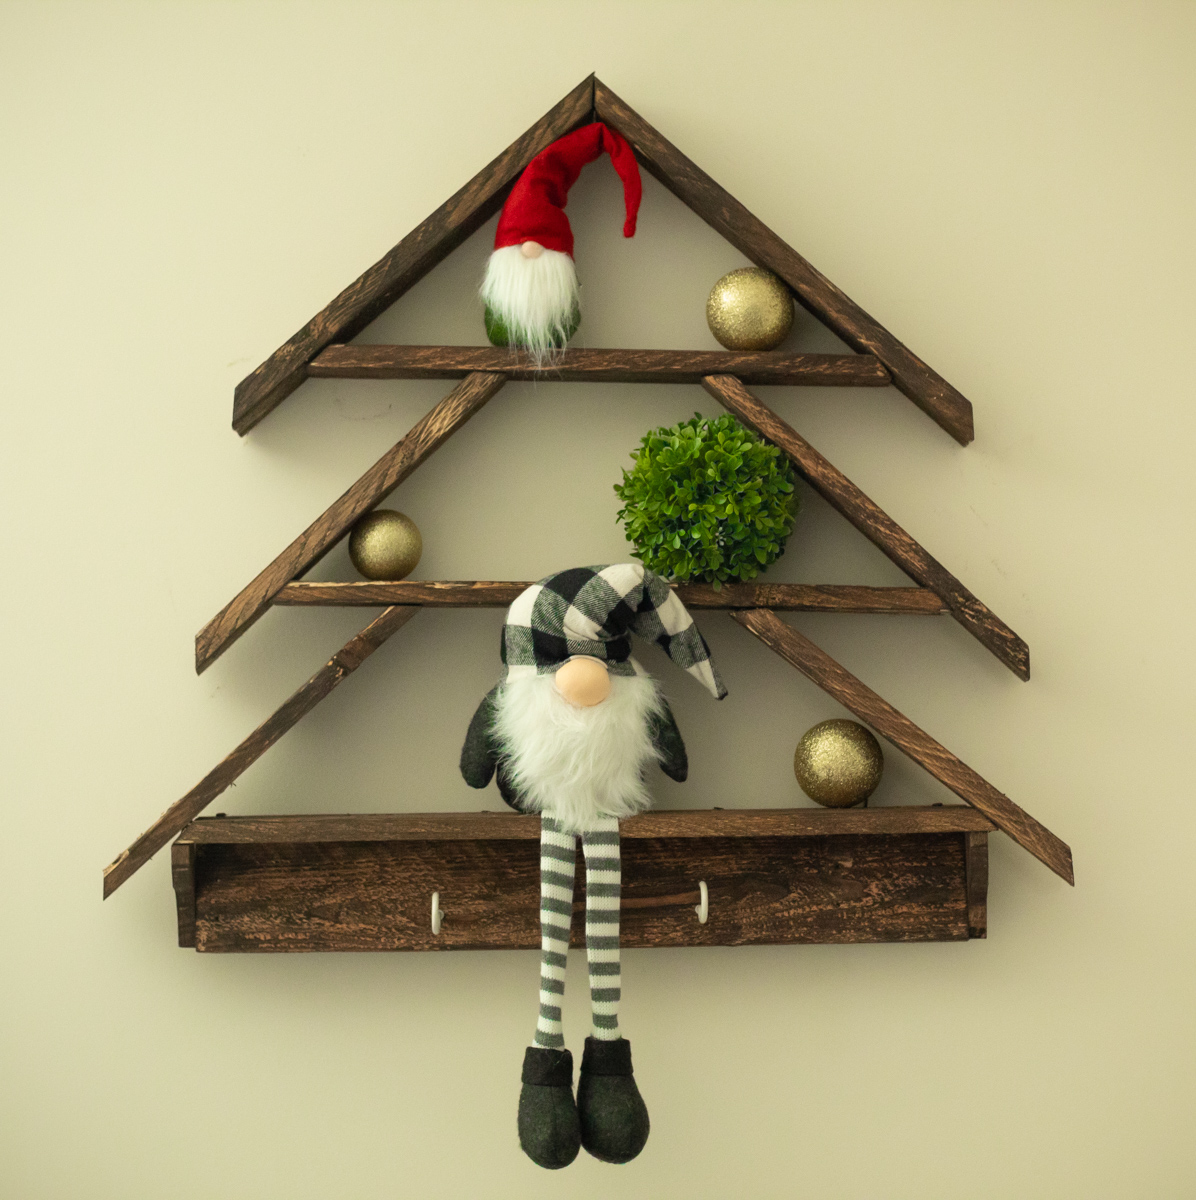 Holiday Pallet Projects: 7 Creative Diy Ideas